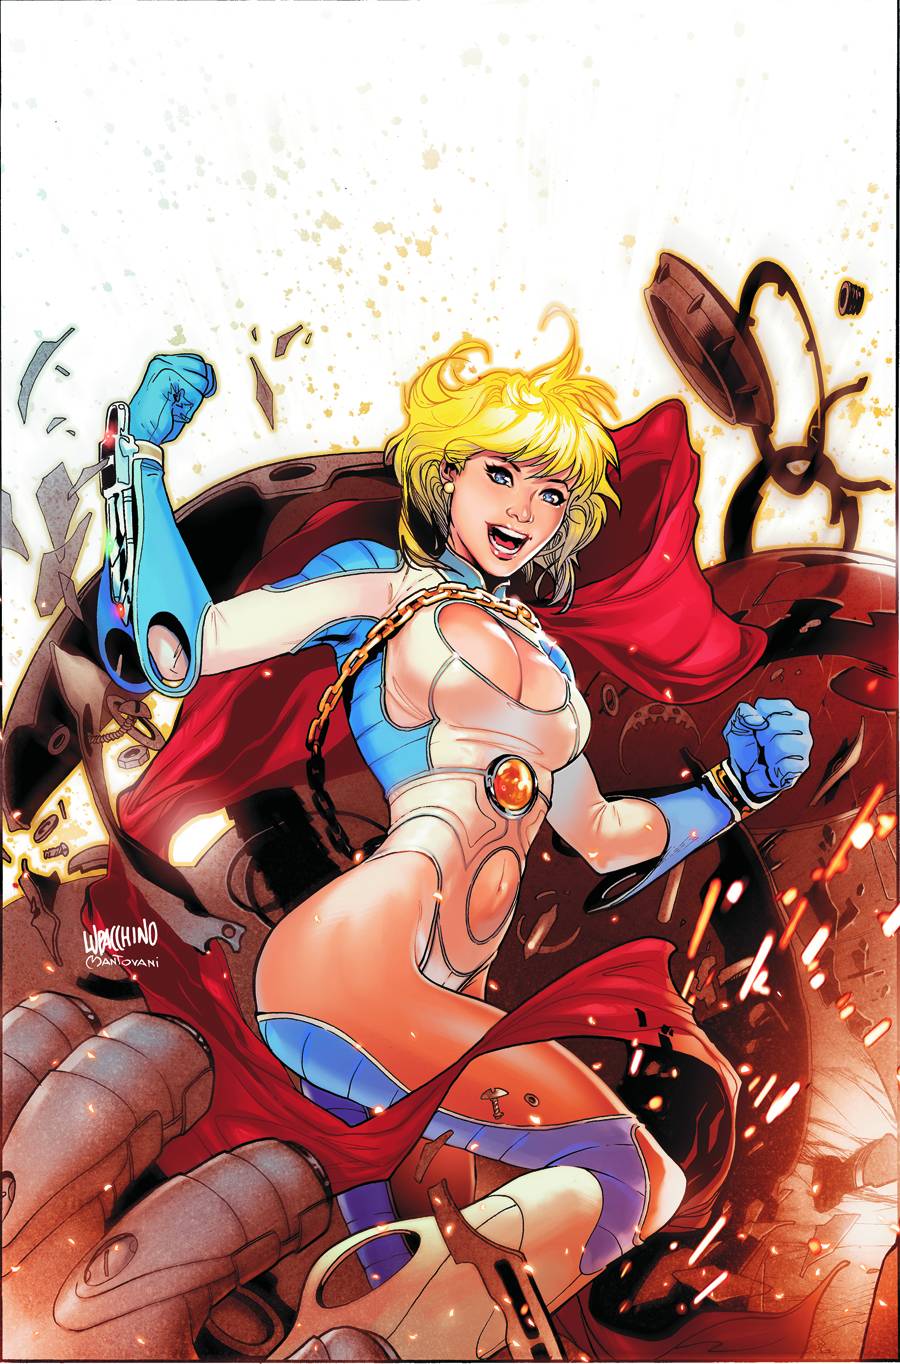 Ame Comi Girls #4 Featuring Power Girl